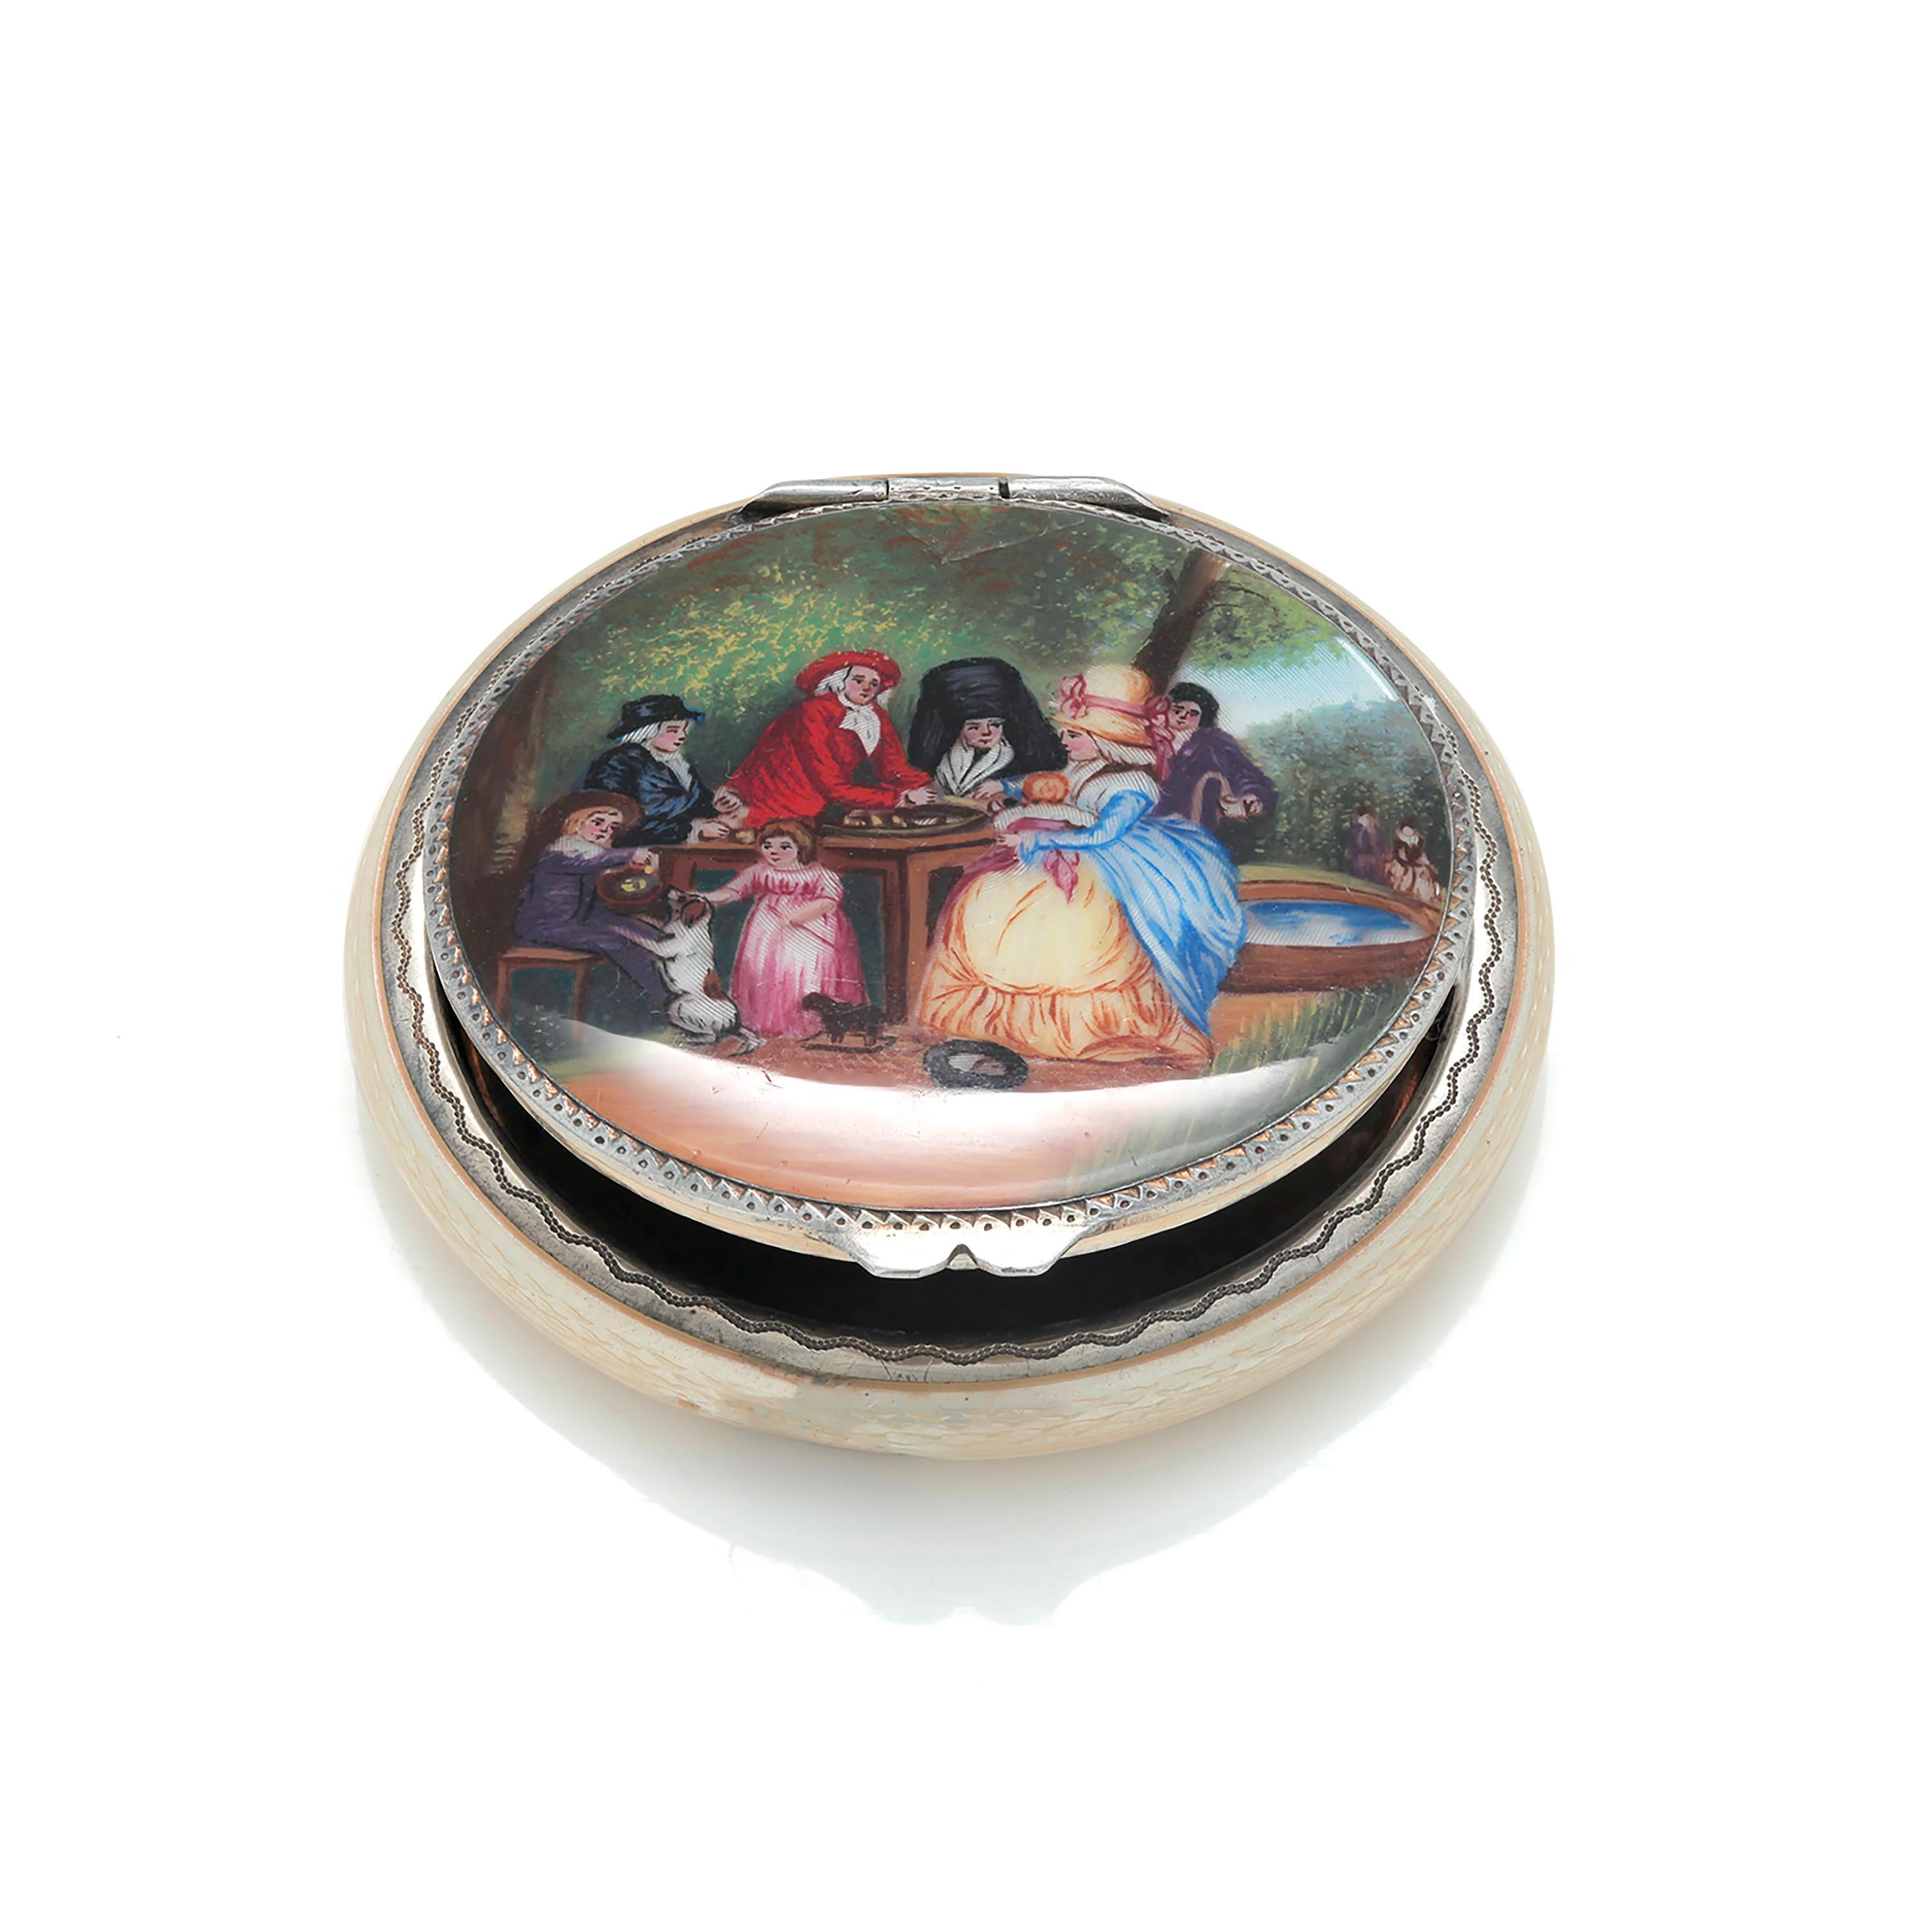 Sterling silver and enameled antique compact. 
Guilloche and figural enamel decoration
Marked Sterling Germany with makers mark
Measuring 2 3/8